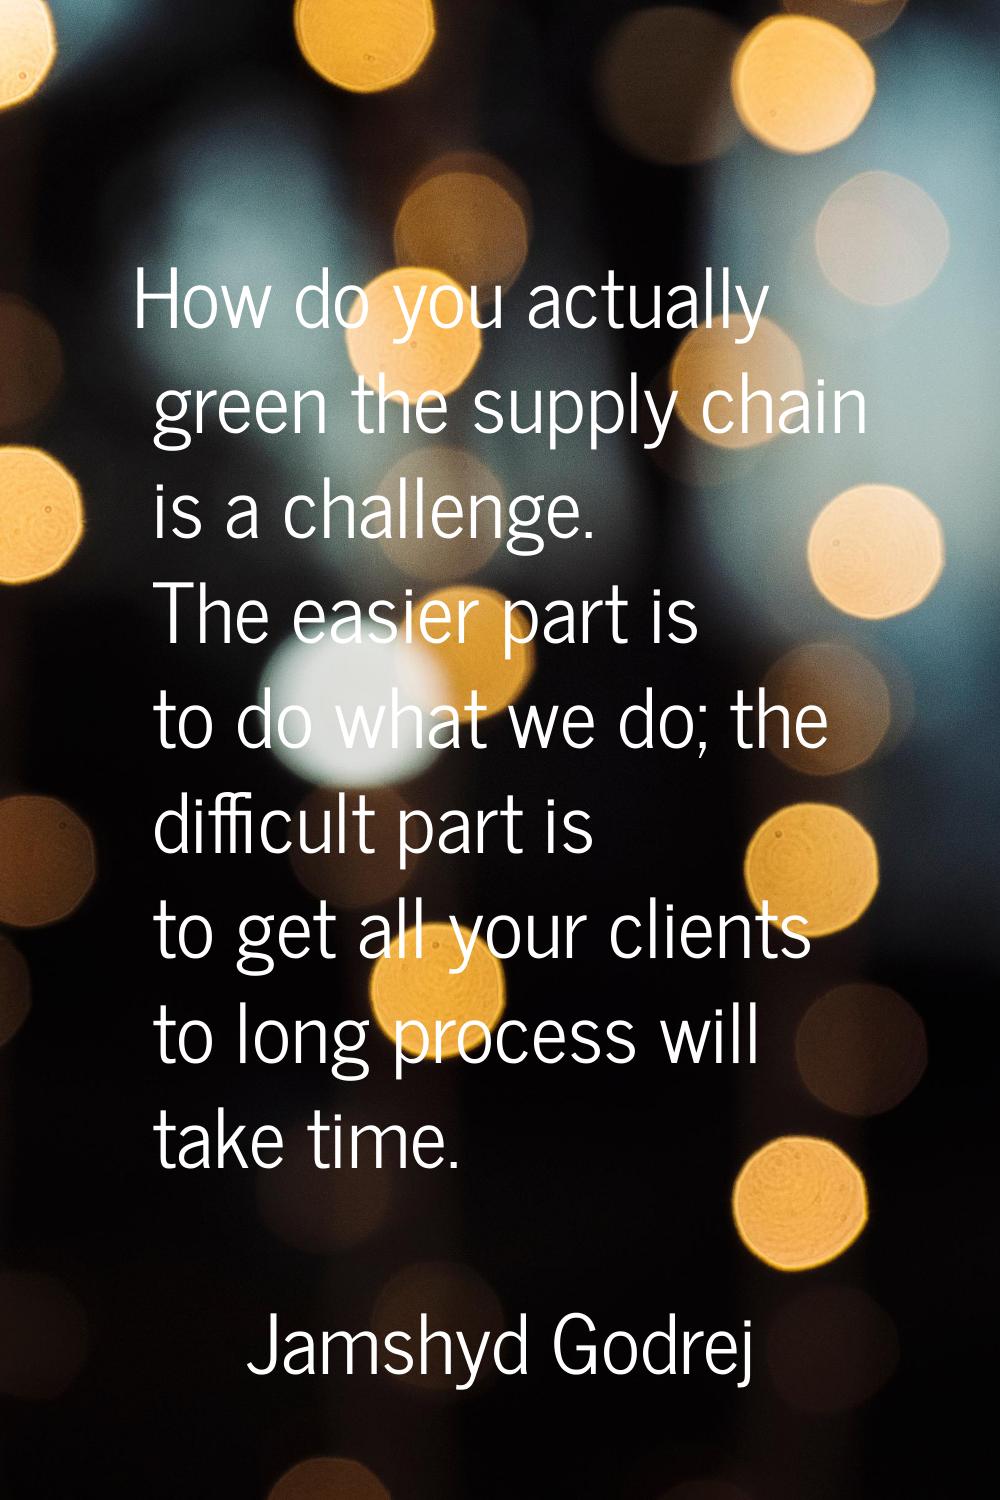 How do you actually green the supply chain is a challenge. The easier part is to do what we do; the